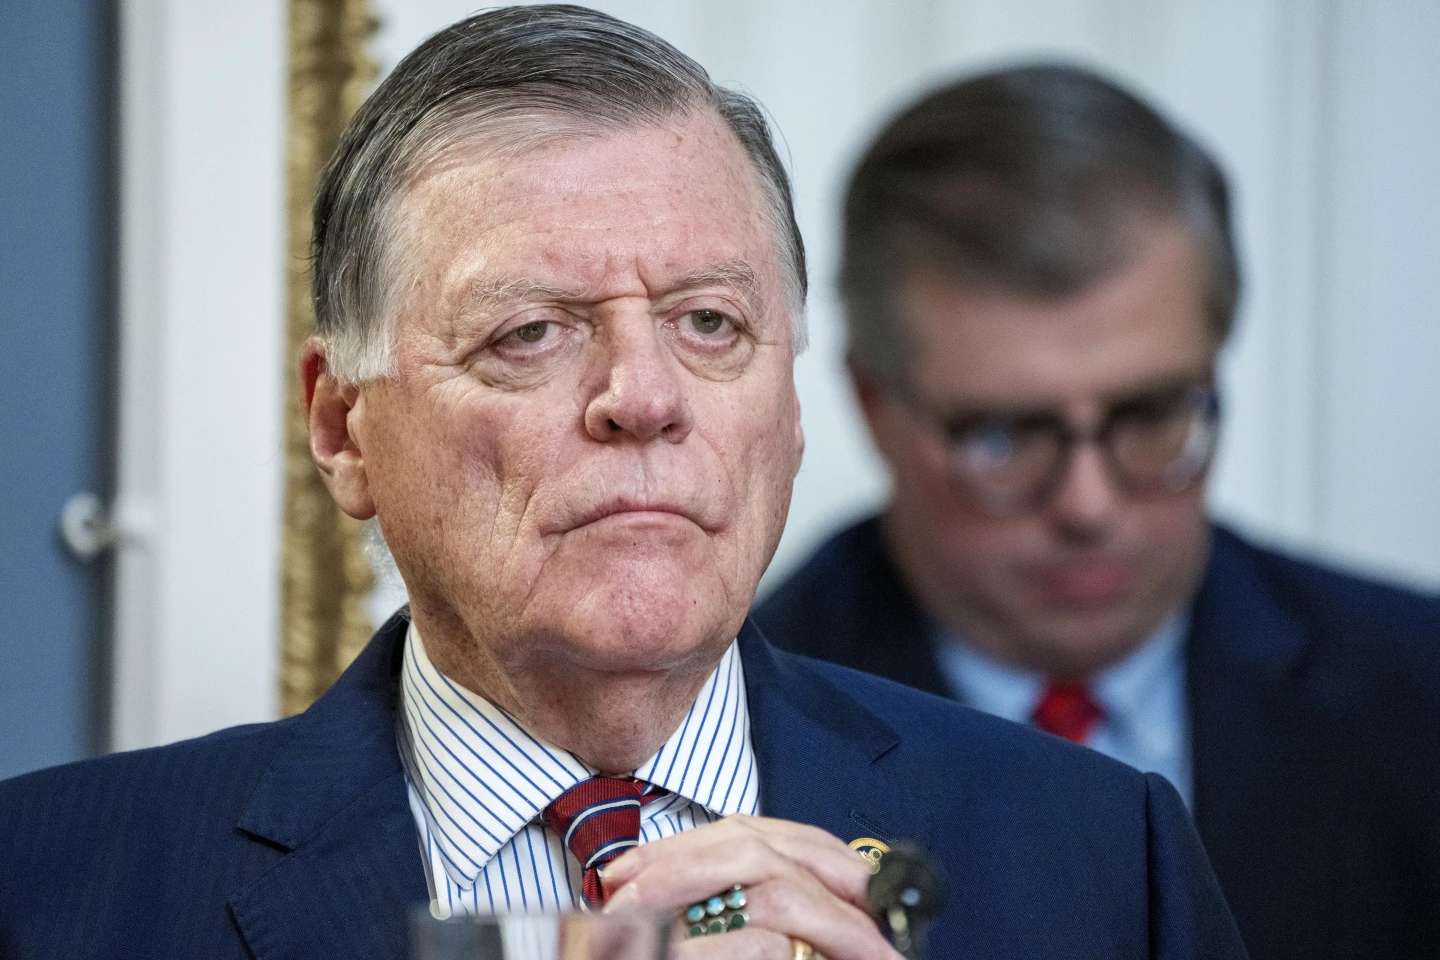 US Rep Tom Cole wins Oklahoma GOP primary outright against well-funded challenger, 3 others